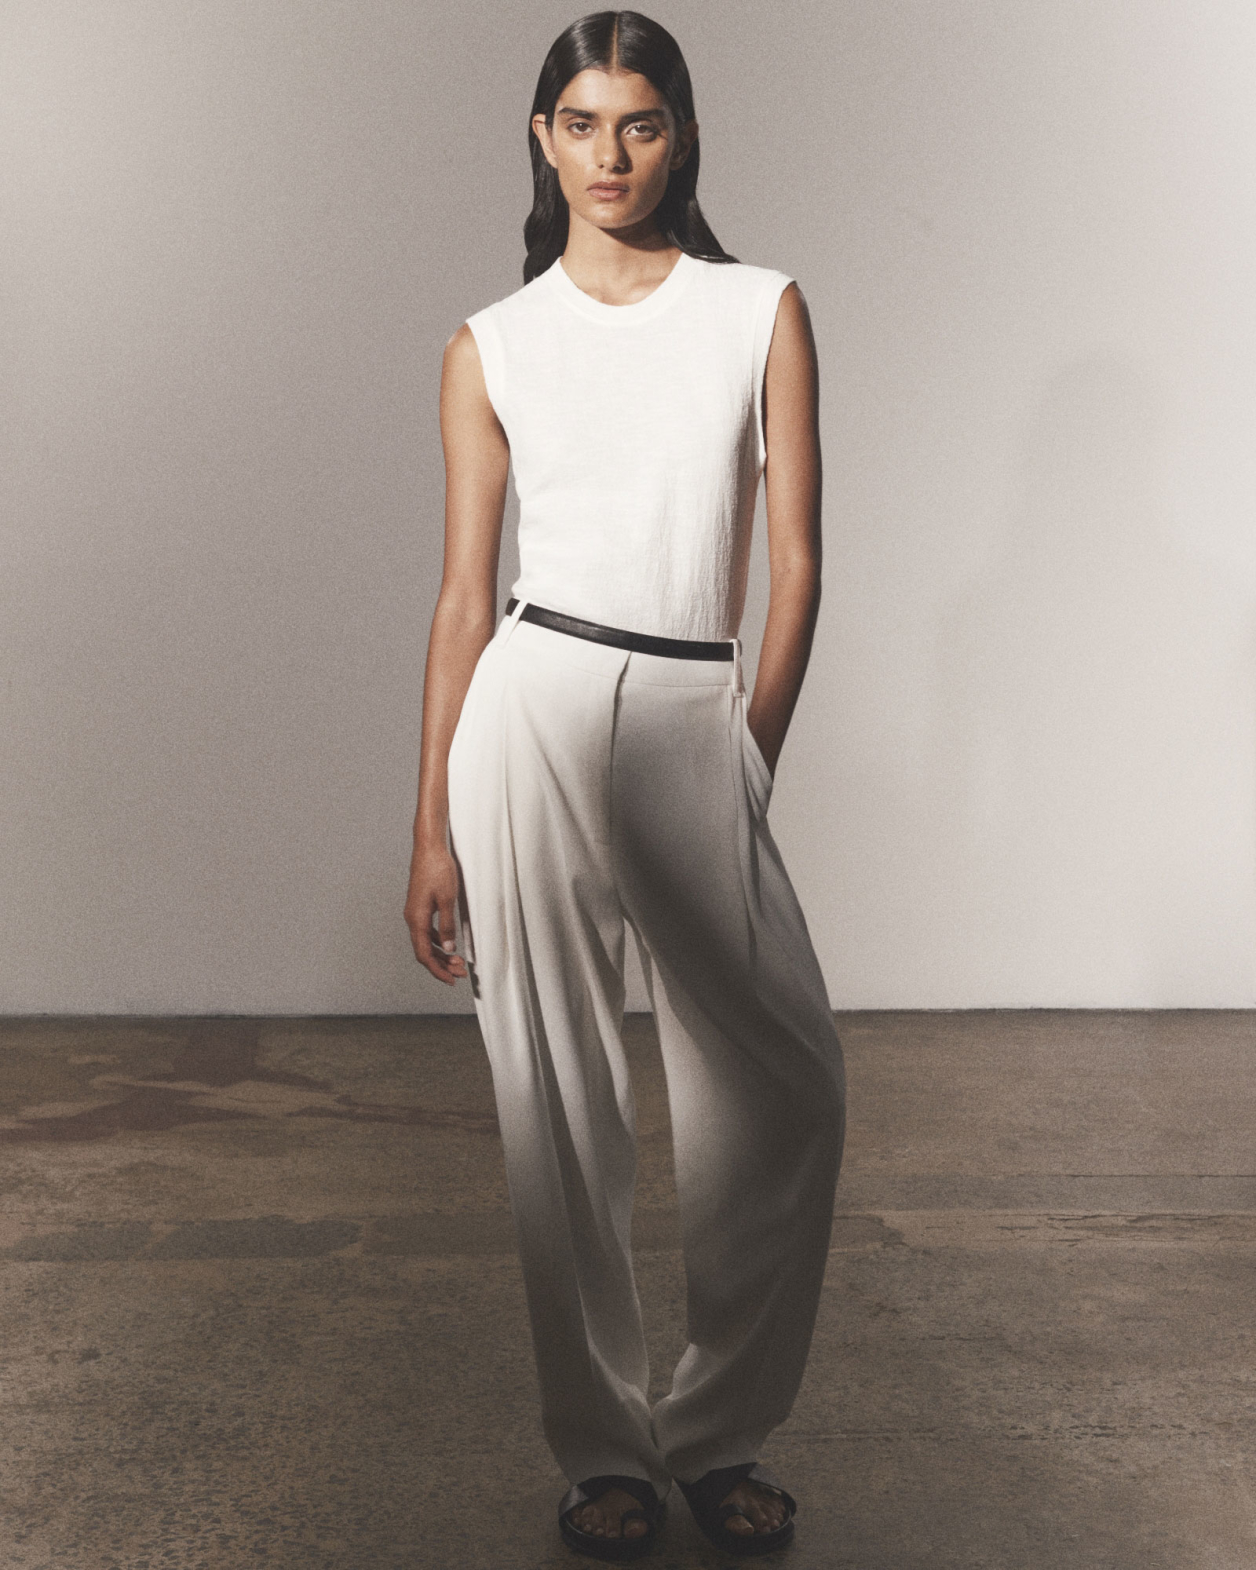 Asha Pleat Front Pant in CREME